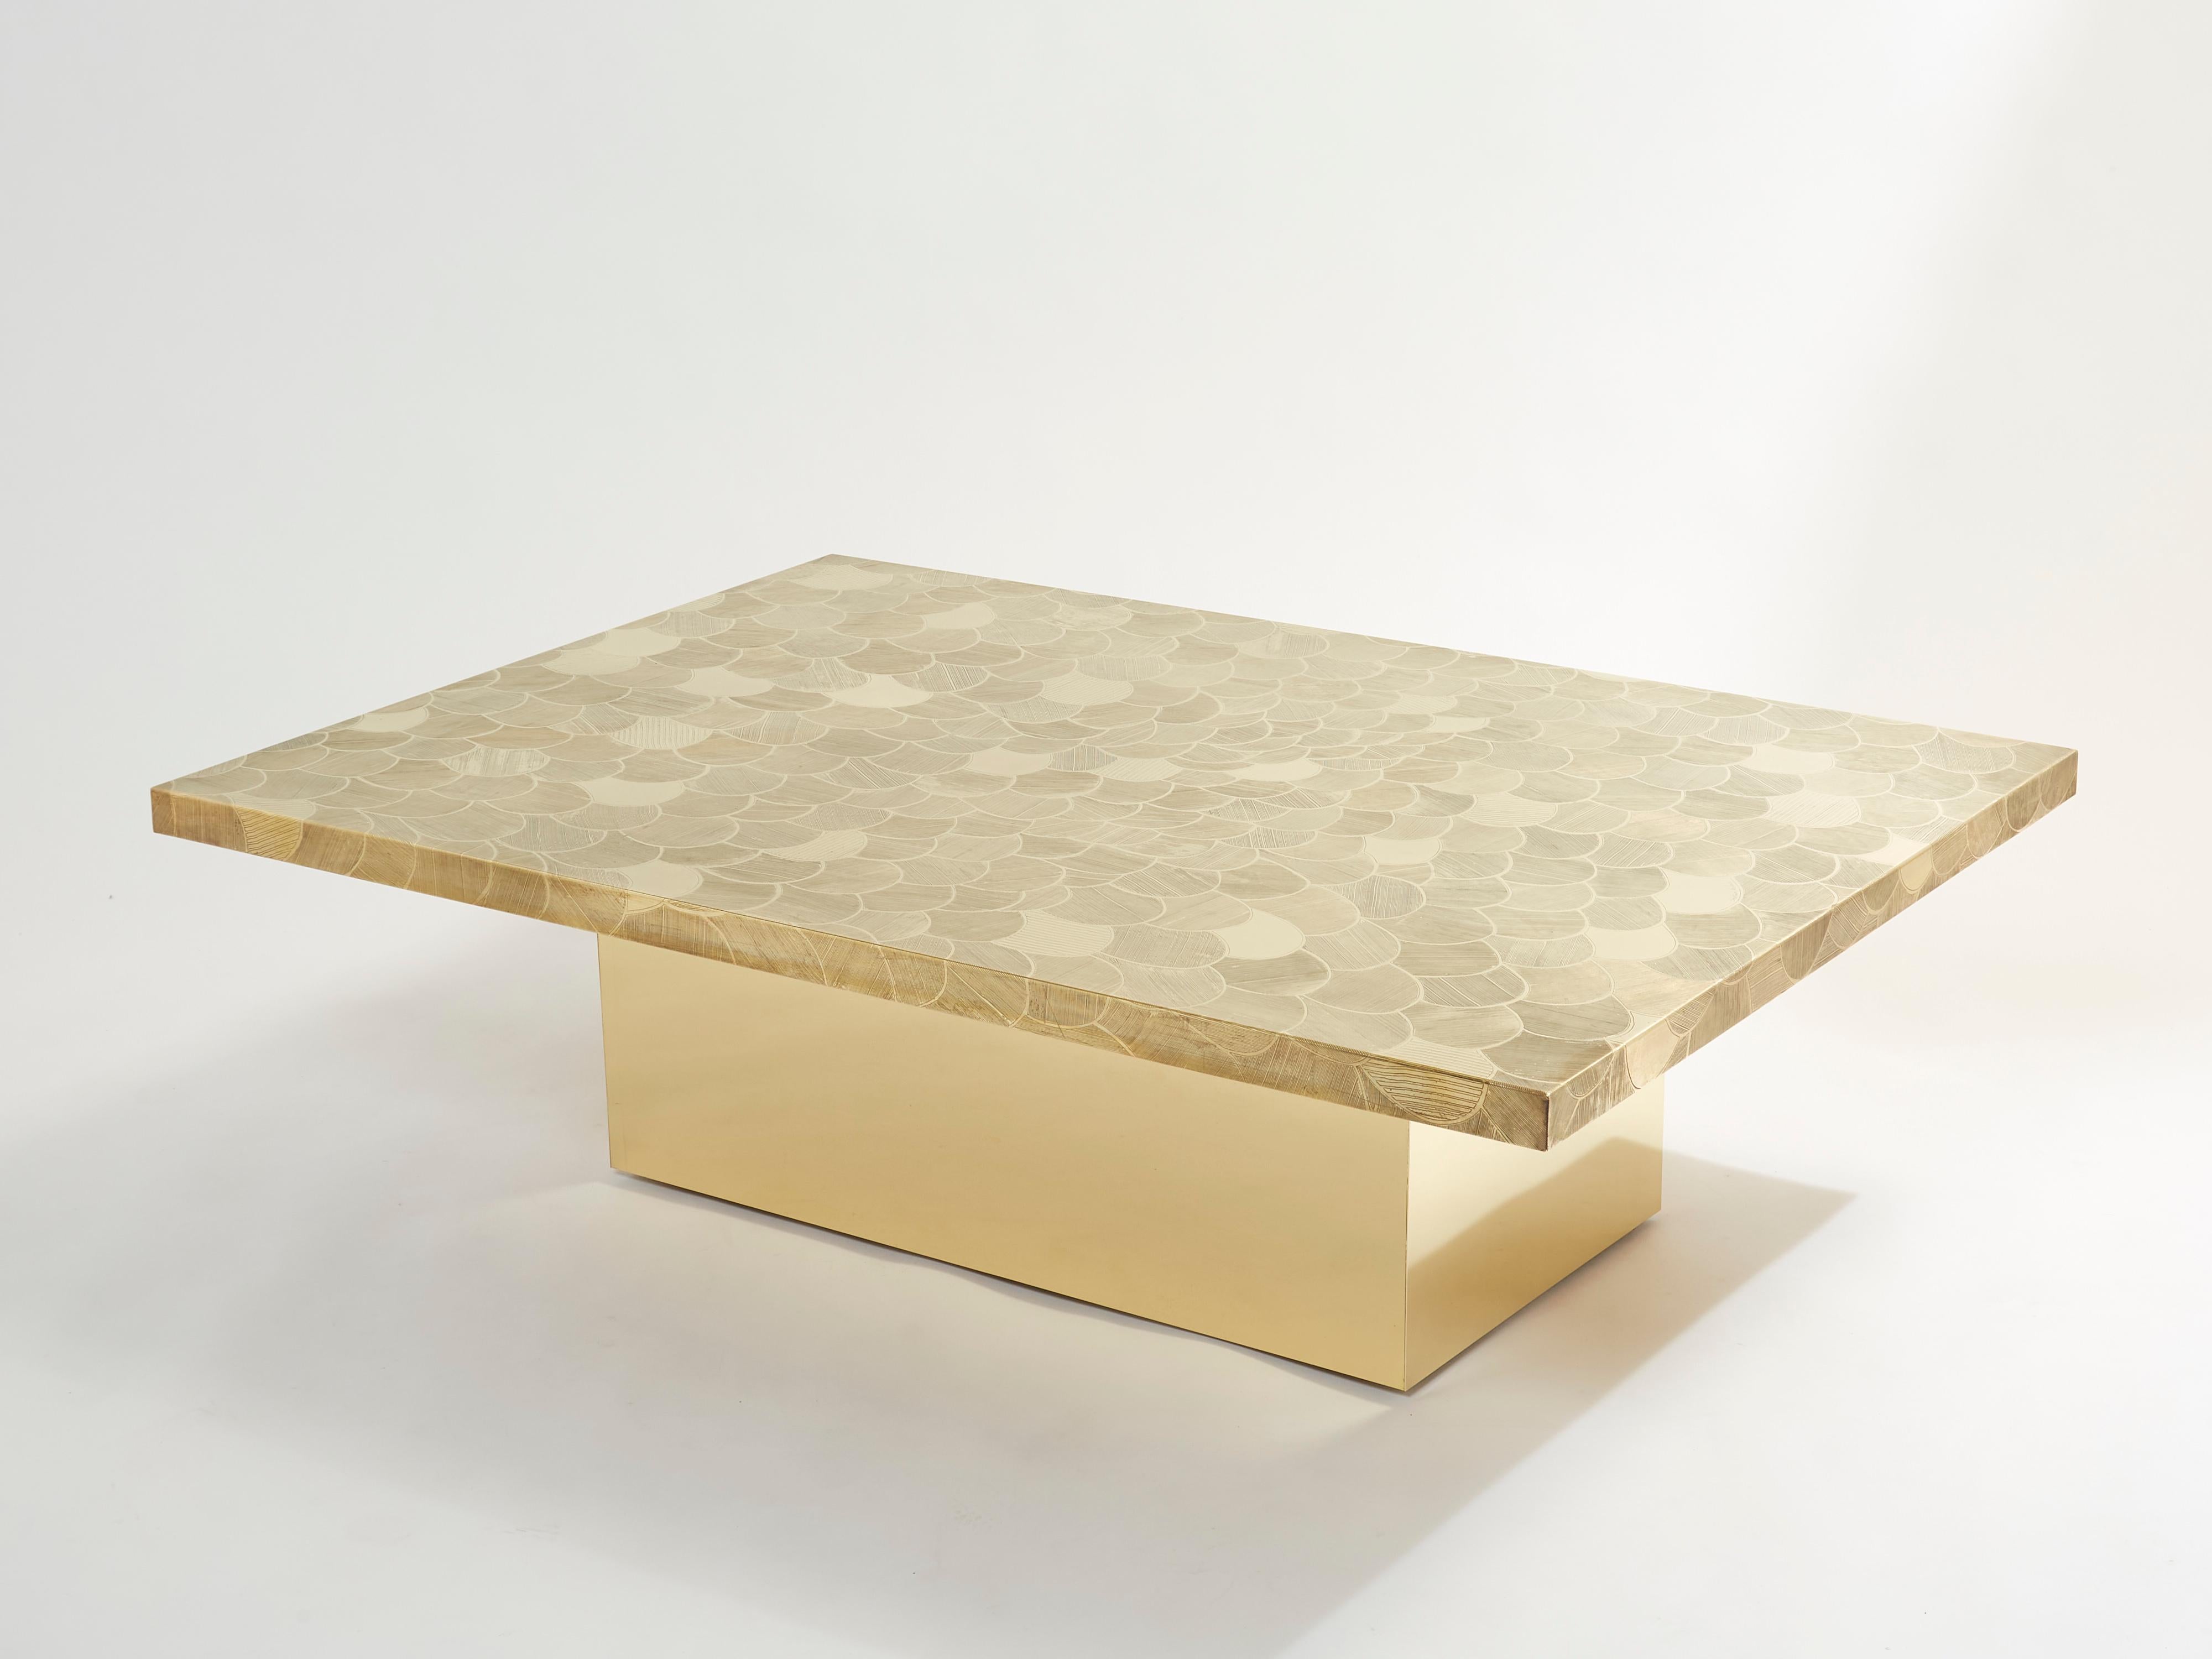 This is a beautiful Belgium coffee table signed by Christian Krekels in the late 1970s. The table features a beautiful decorative etched brass table top, and is set on a large wood base covered with brass. The rectangular top with vividly detailed